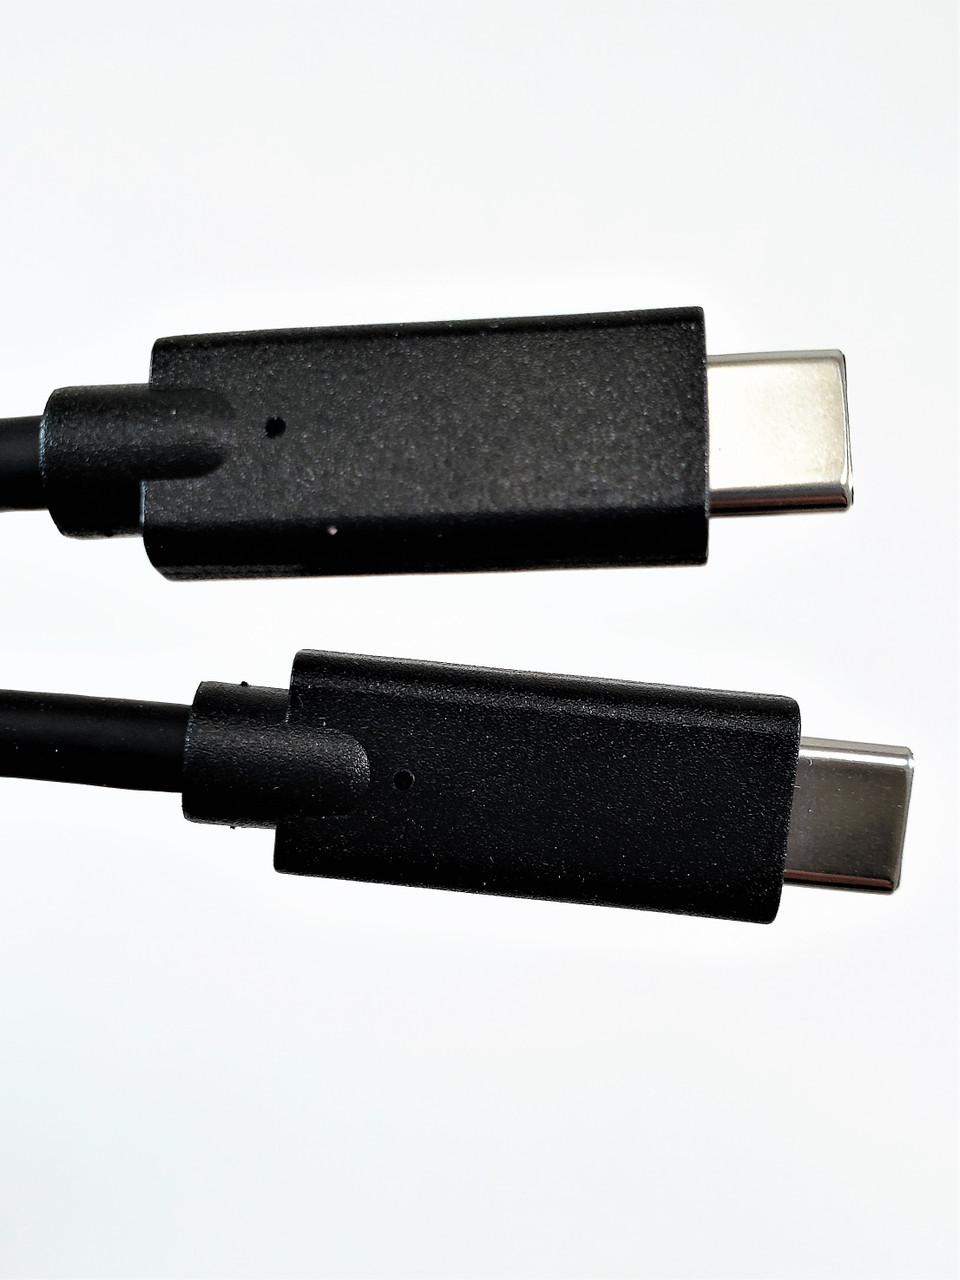 1 Meter USB 2.0 C-Male to C-Male Cable